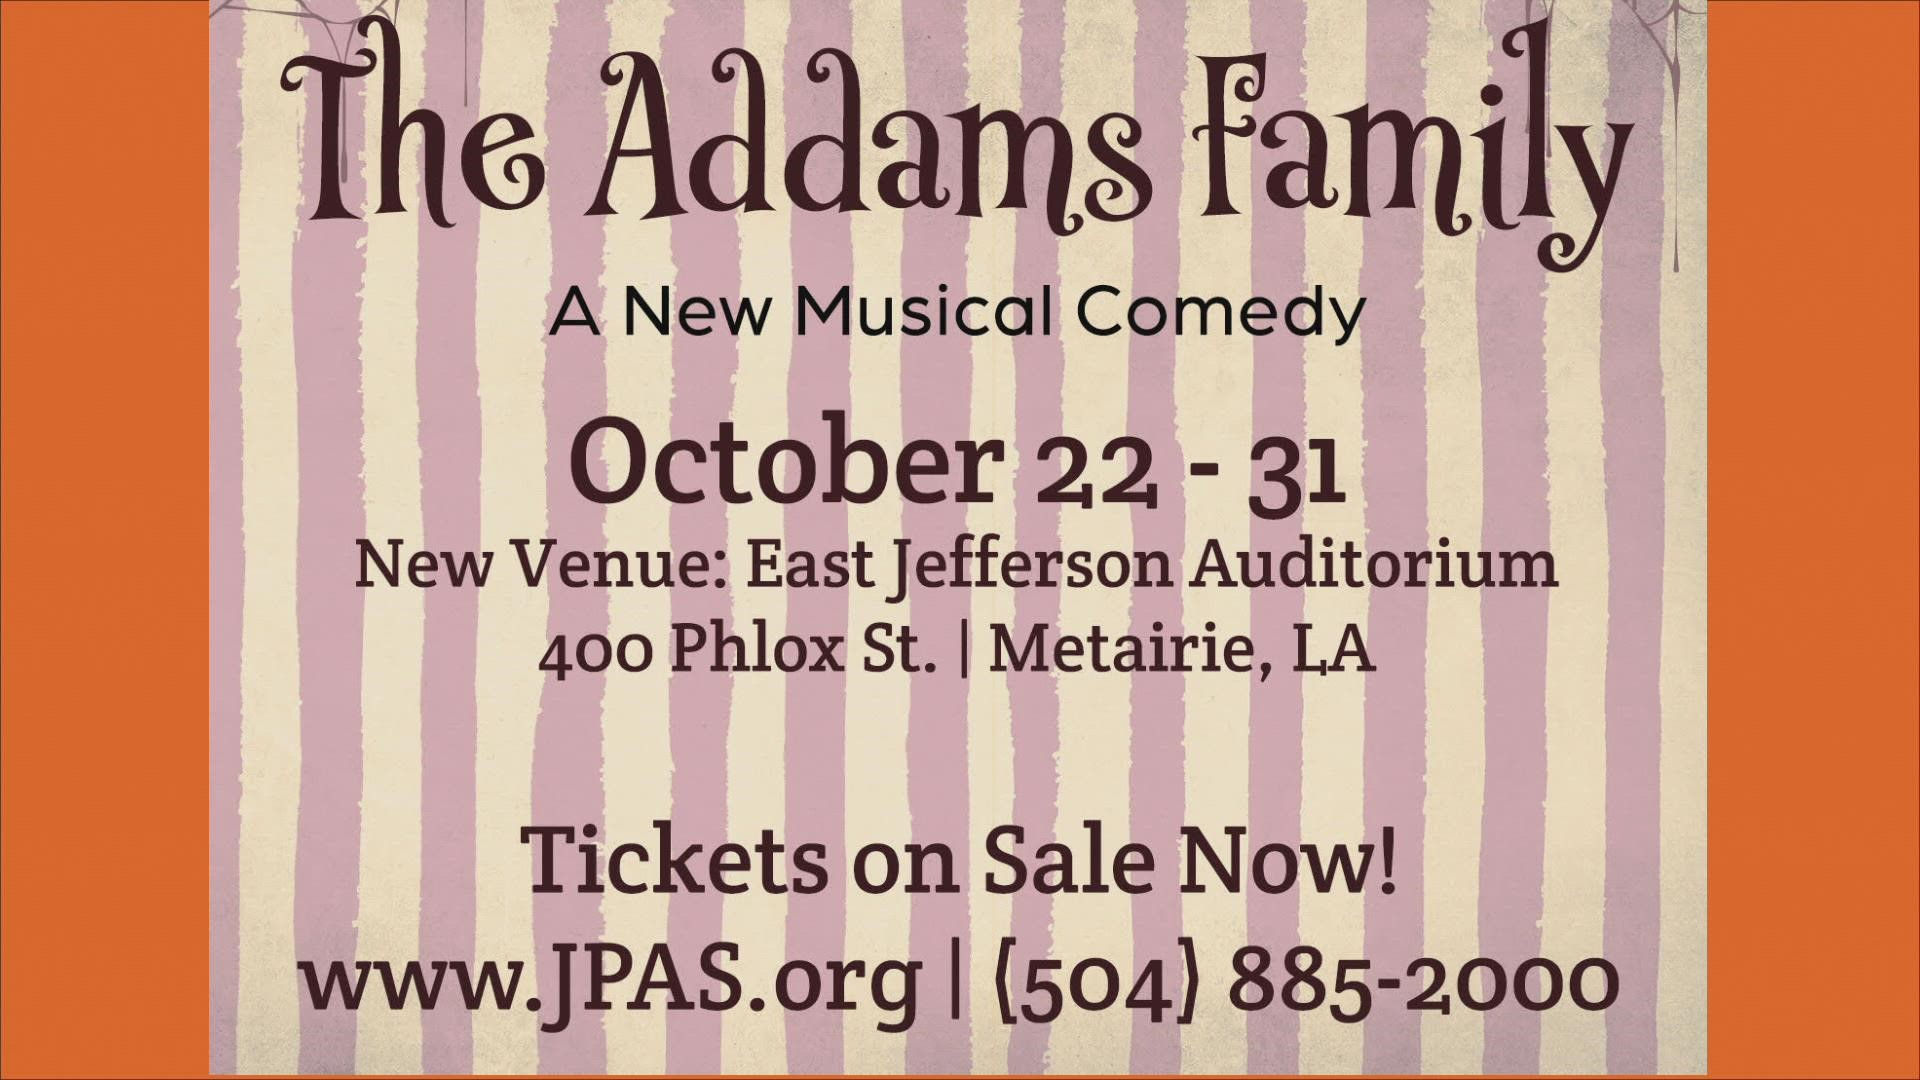 Visit www.JPAS.org to purchase tickets